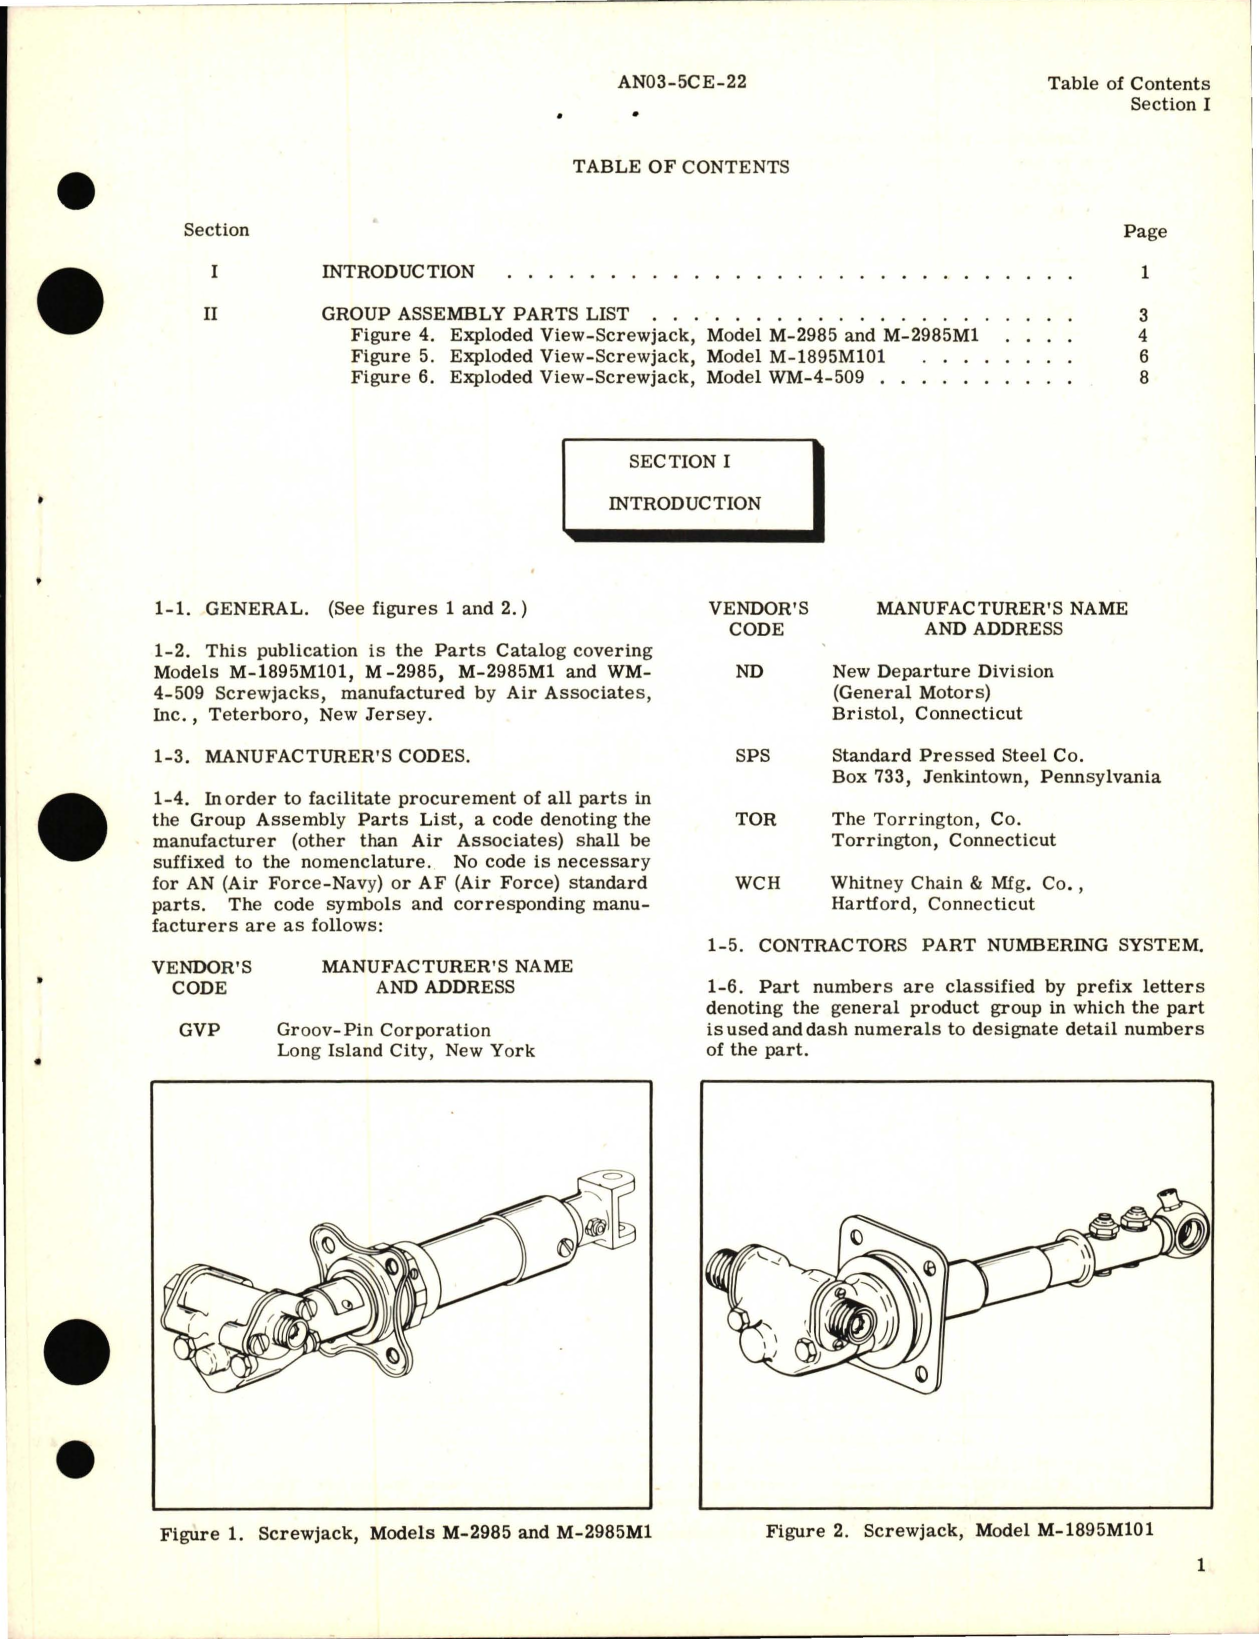 Sample page 7 from AirCorps Library document: Illustrated Parts Breakdown for Screwjacks - Models M2985, M-2985M1, M-1895M101 and WM-4-509 